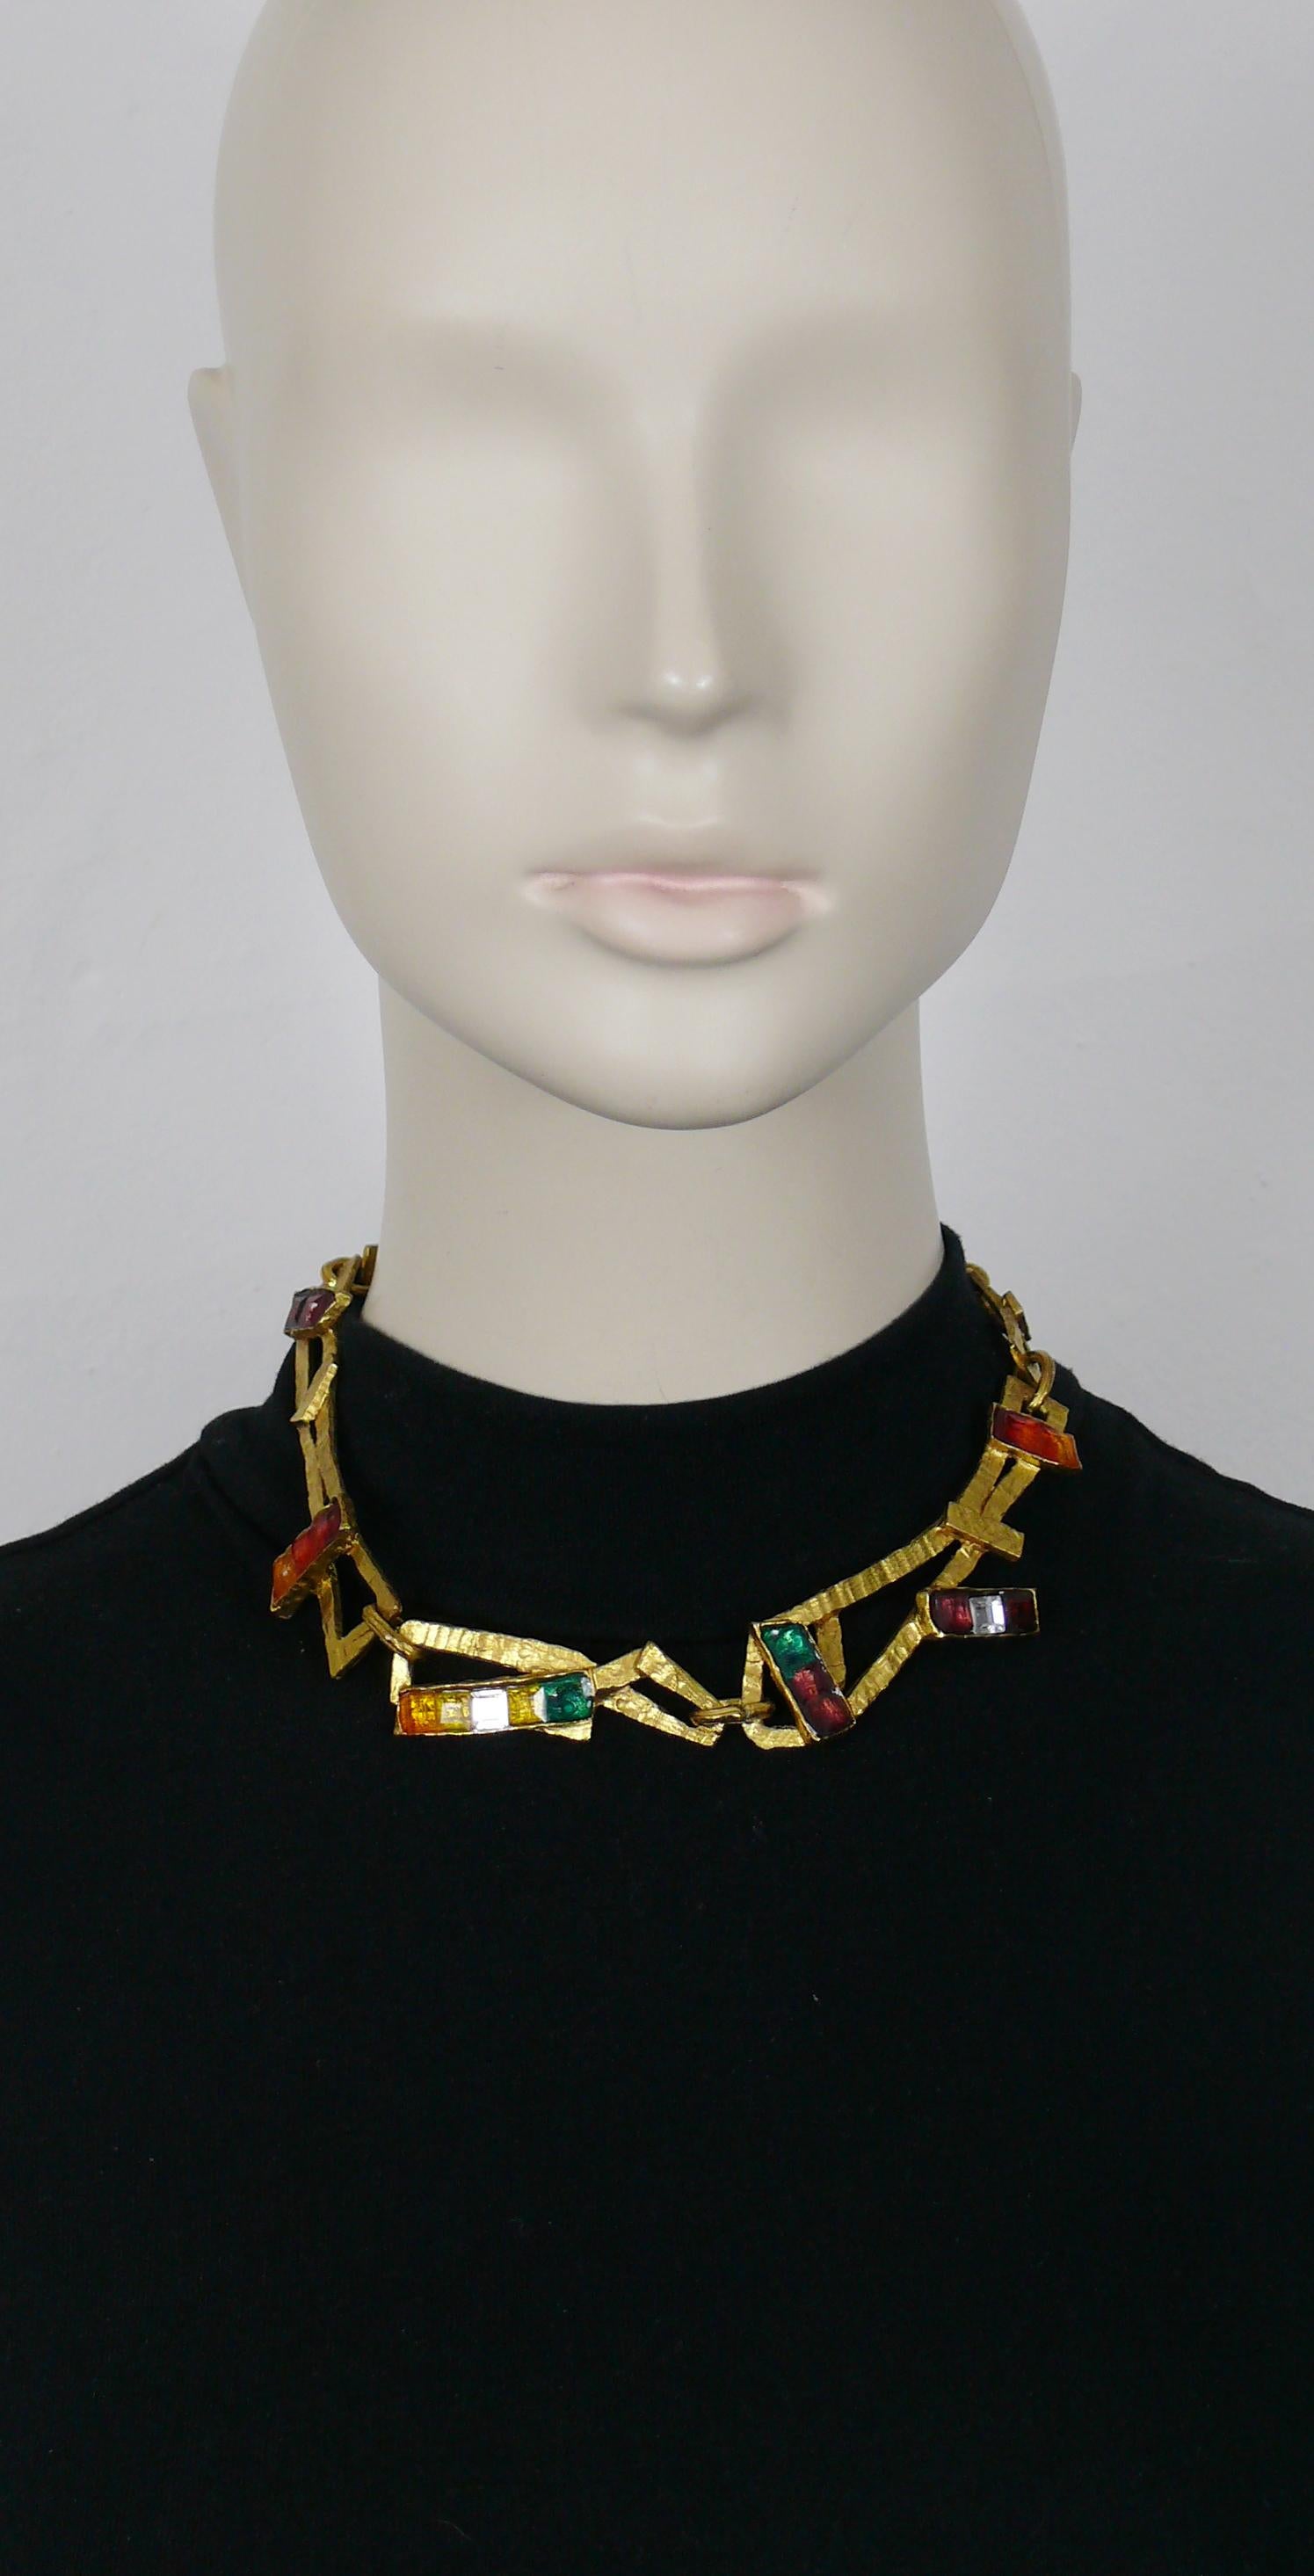 CHRISTIAN LACROIX vintage gold tone necklace featuring textured free form links embellished with multicolor crystals.

CHRISTIAN LACROIX Rainbow Collection.

T-bar and toggles closure.
Adjustable length.

Marked CHRISTIAN LACROIX CL Made in